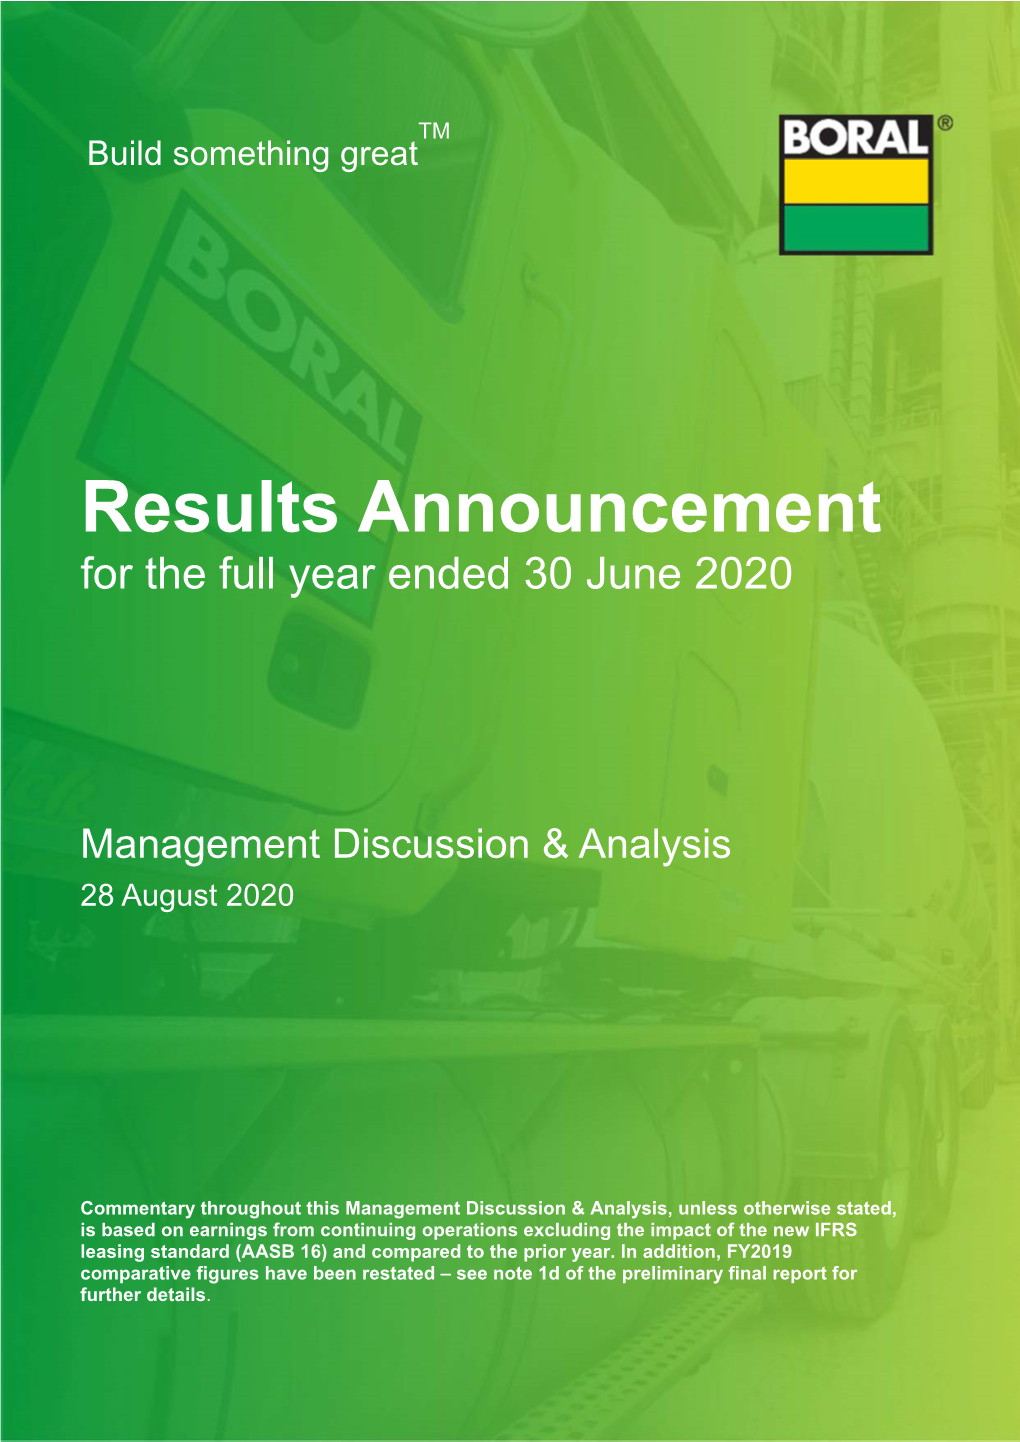 Results Announcement for the Full Year Ended 30 June 2020